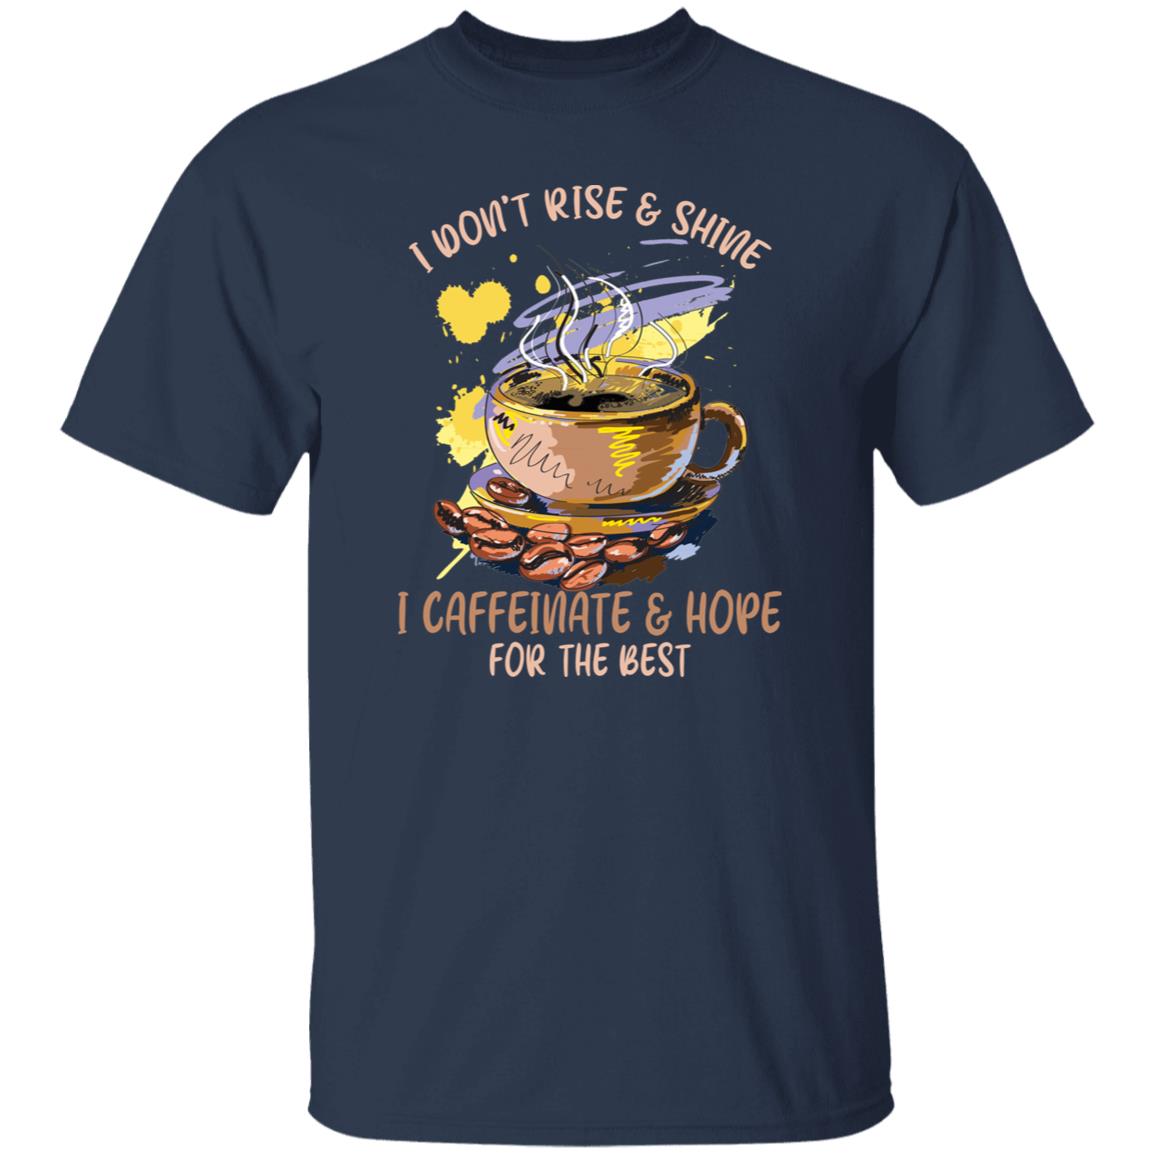 I caffeinate and hope coffee cup Unisex shirt gift black navy dark heather-Navy-Family-Gift-Planet